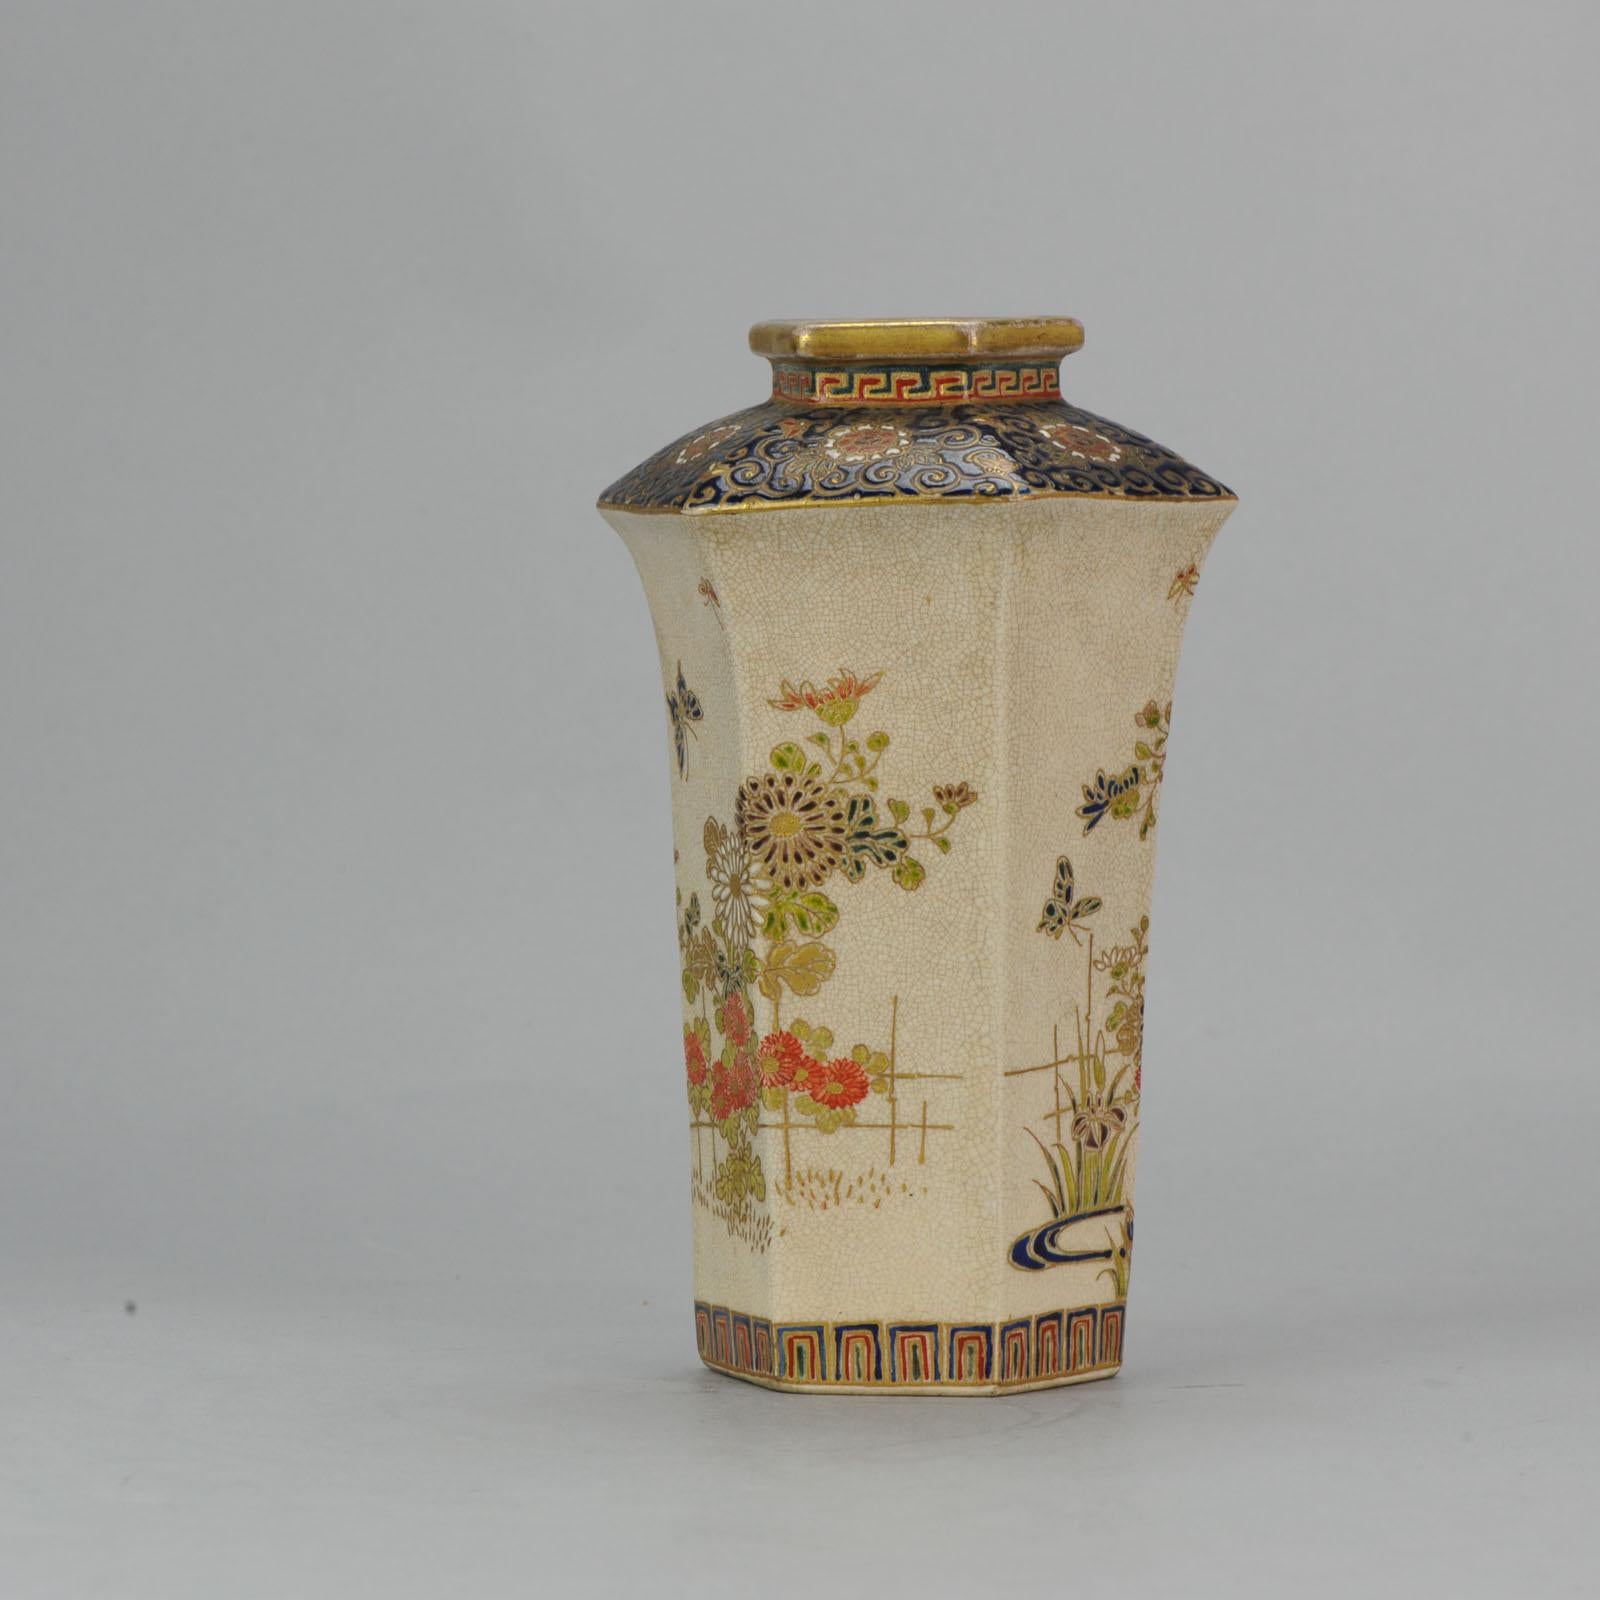 Lovely detailed piece. Marked on base with makers mark and mon crest
Condition
Overall condition perfect. Size; 185mm
Period
Meiji Periode (1867-1912).